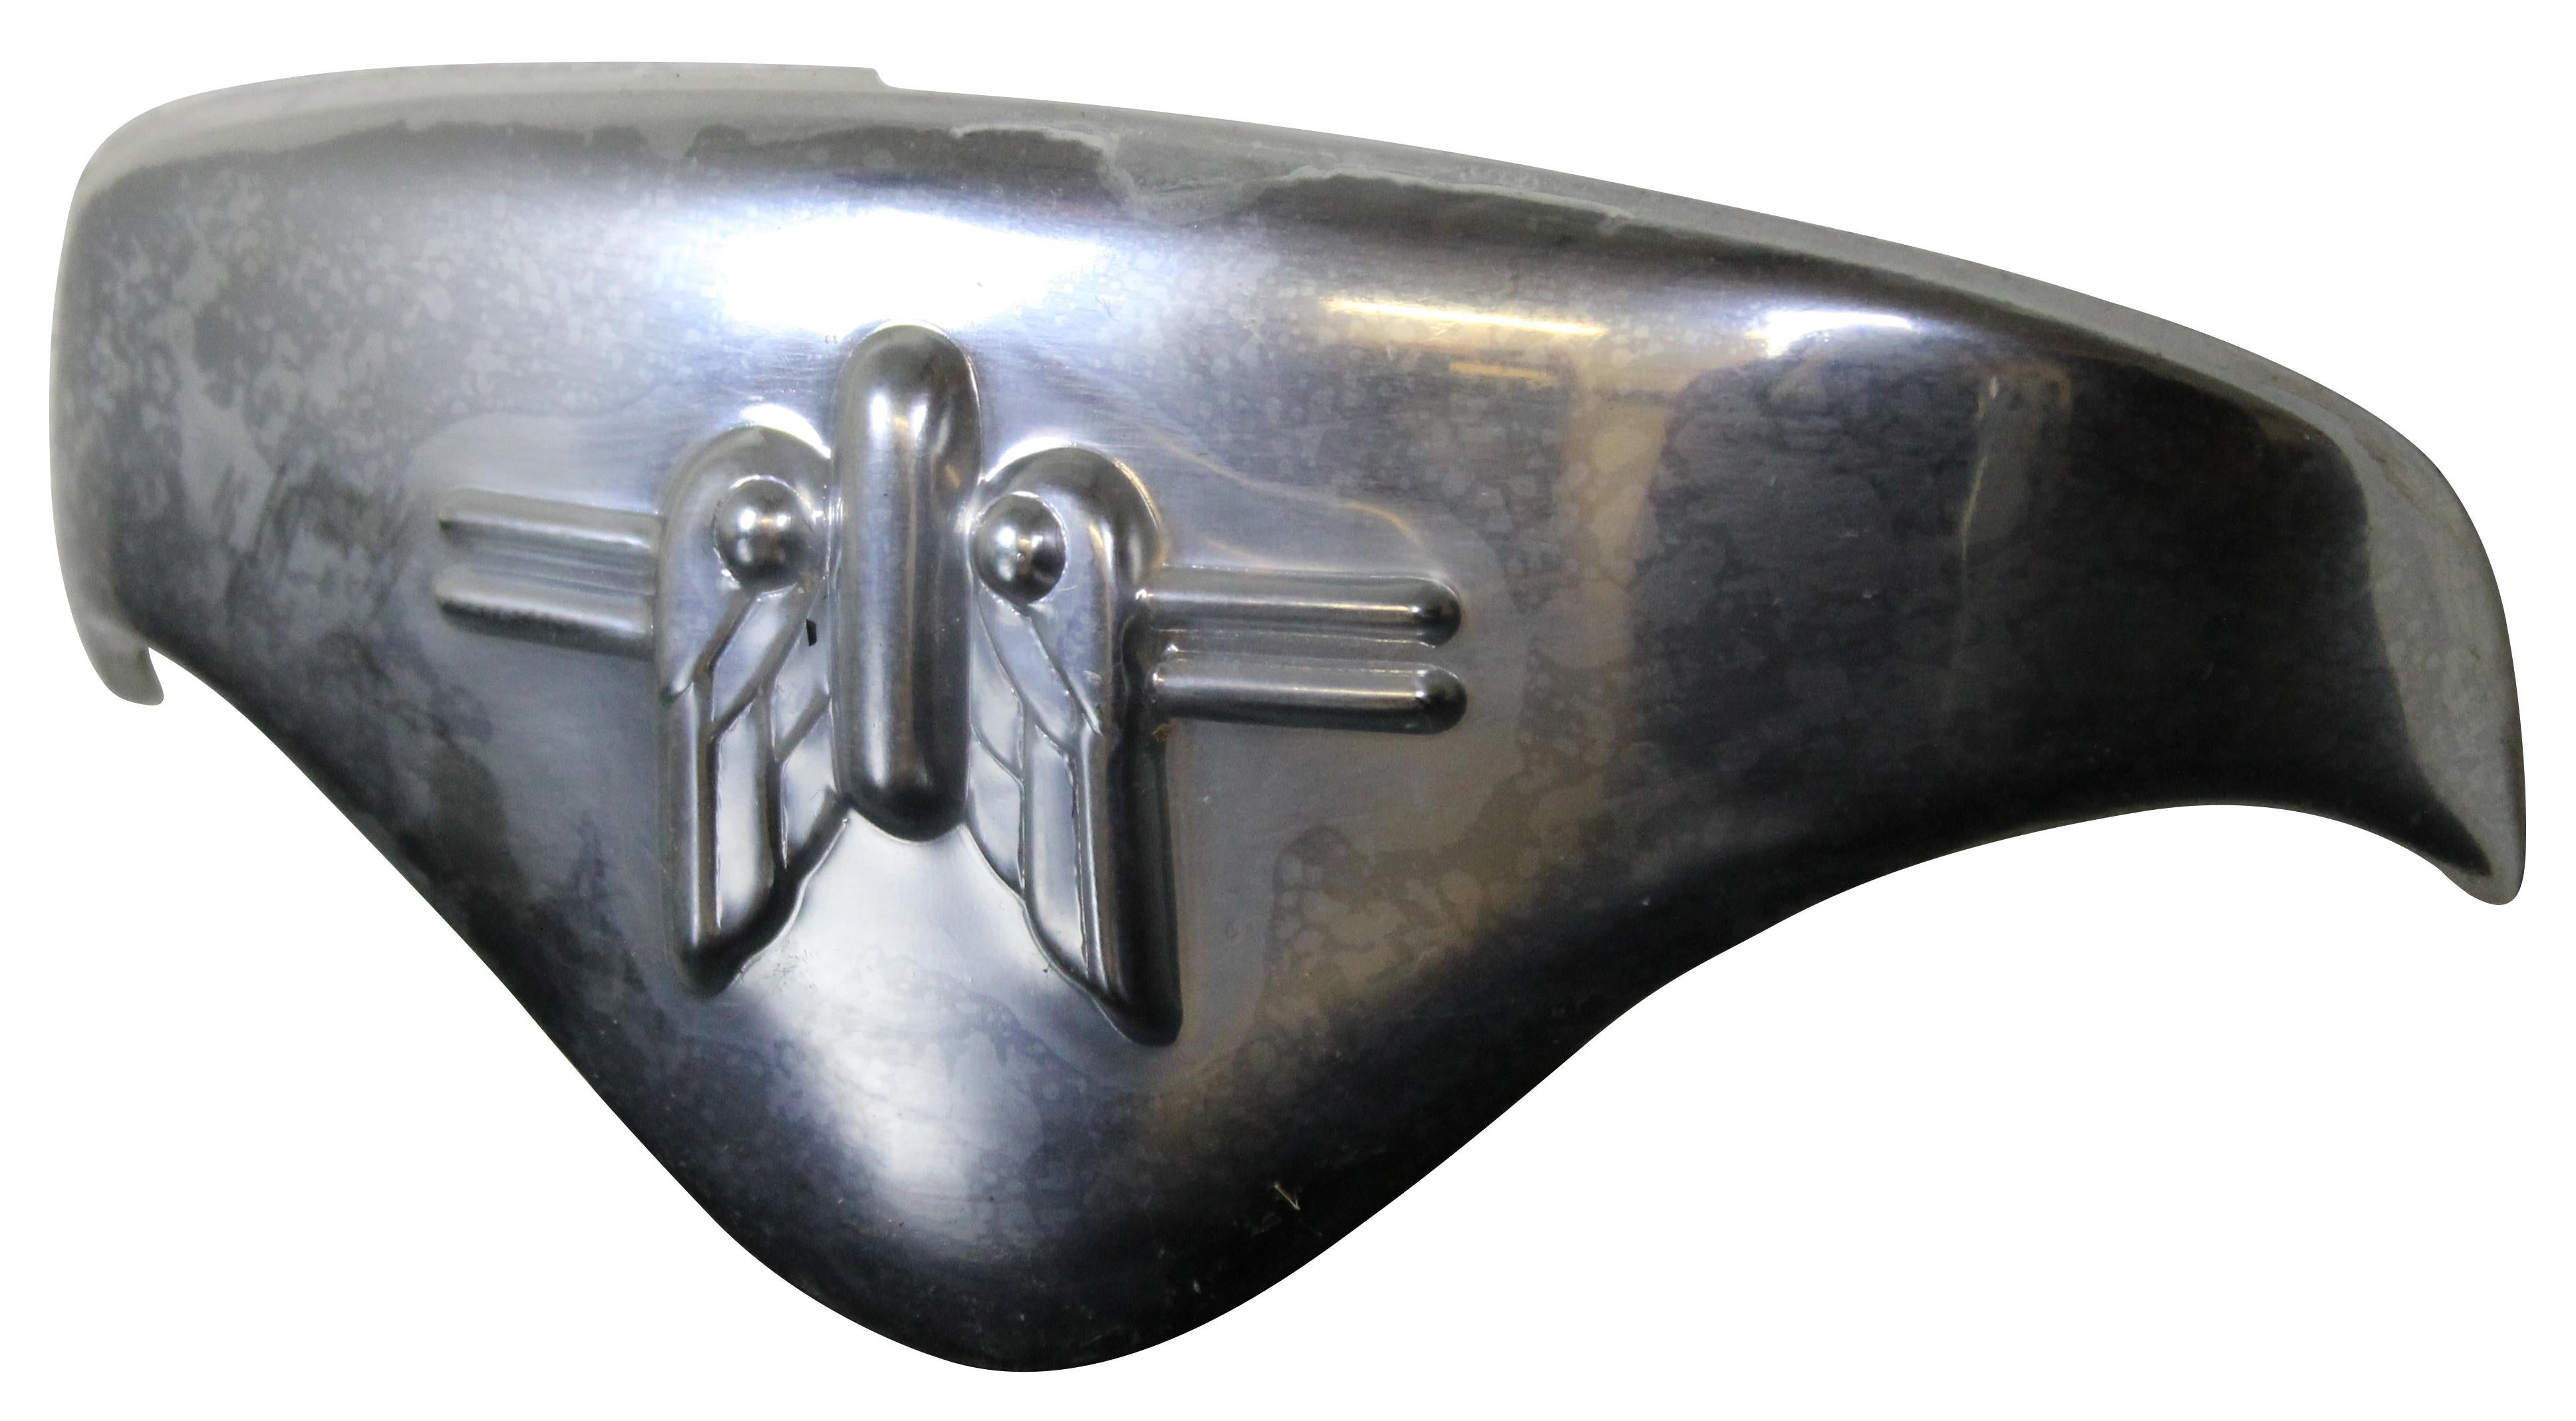 Vintage Harley Davidson Knucklehead Panhead chrome front fender tip with winged rocket design.

Originally purchased in the 1980s from the Pennsylvania warehouse where a cache of new old stock Harley parts were discovered.